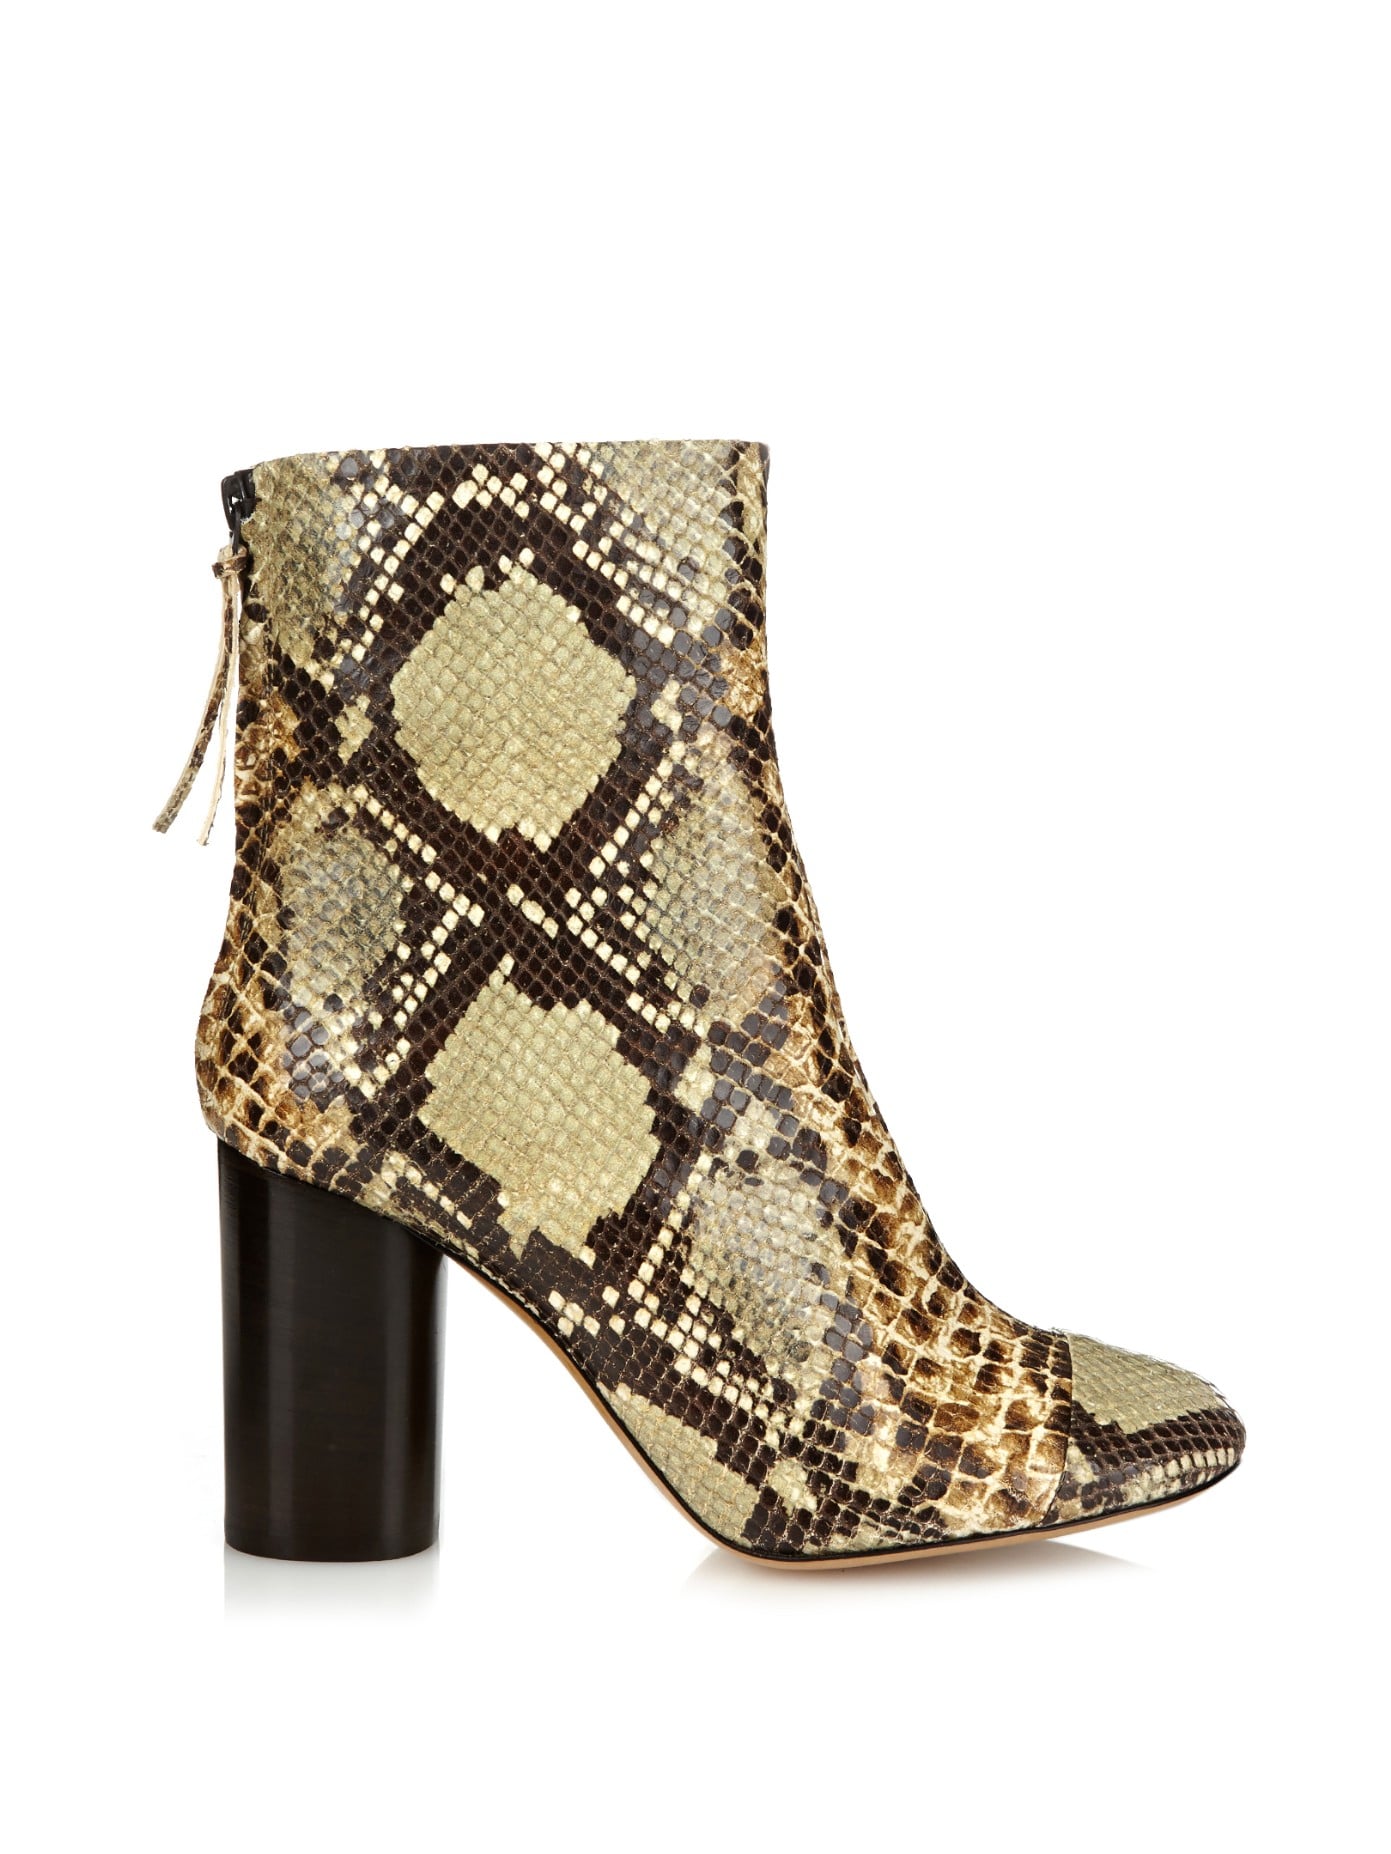 Isabel Marant Grover Faux Snakeskin Ankle Boots ($1,080) | 150+ Fashion to Add to Your Holiday Wish List Now | POPSUGAR Fashion Photo 100